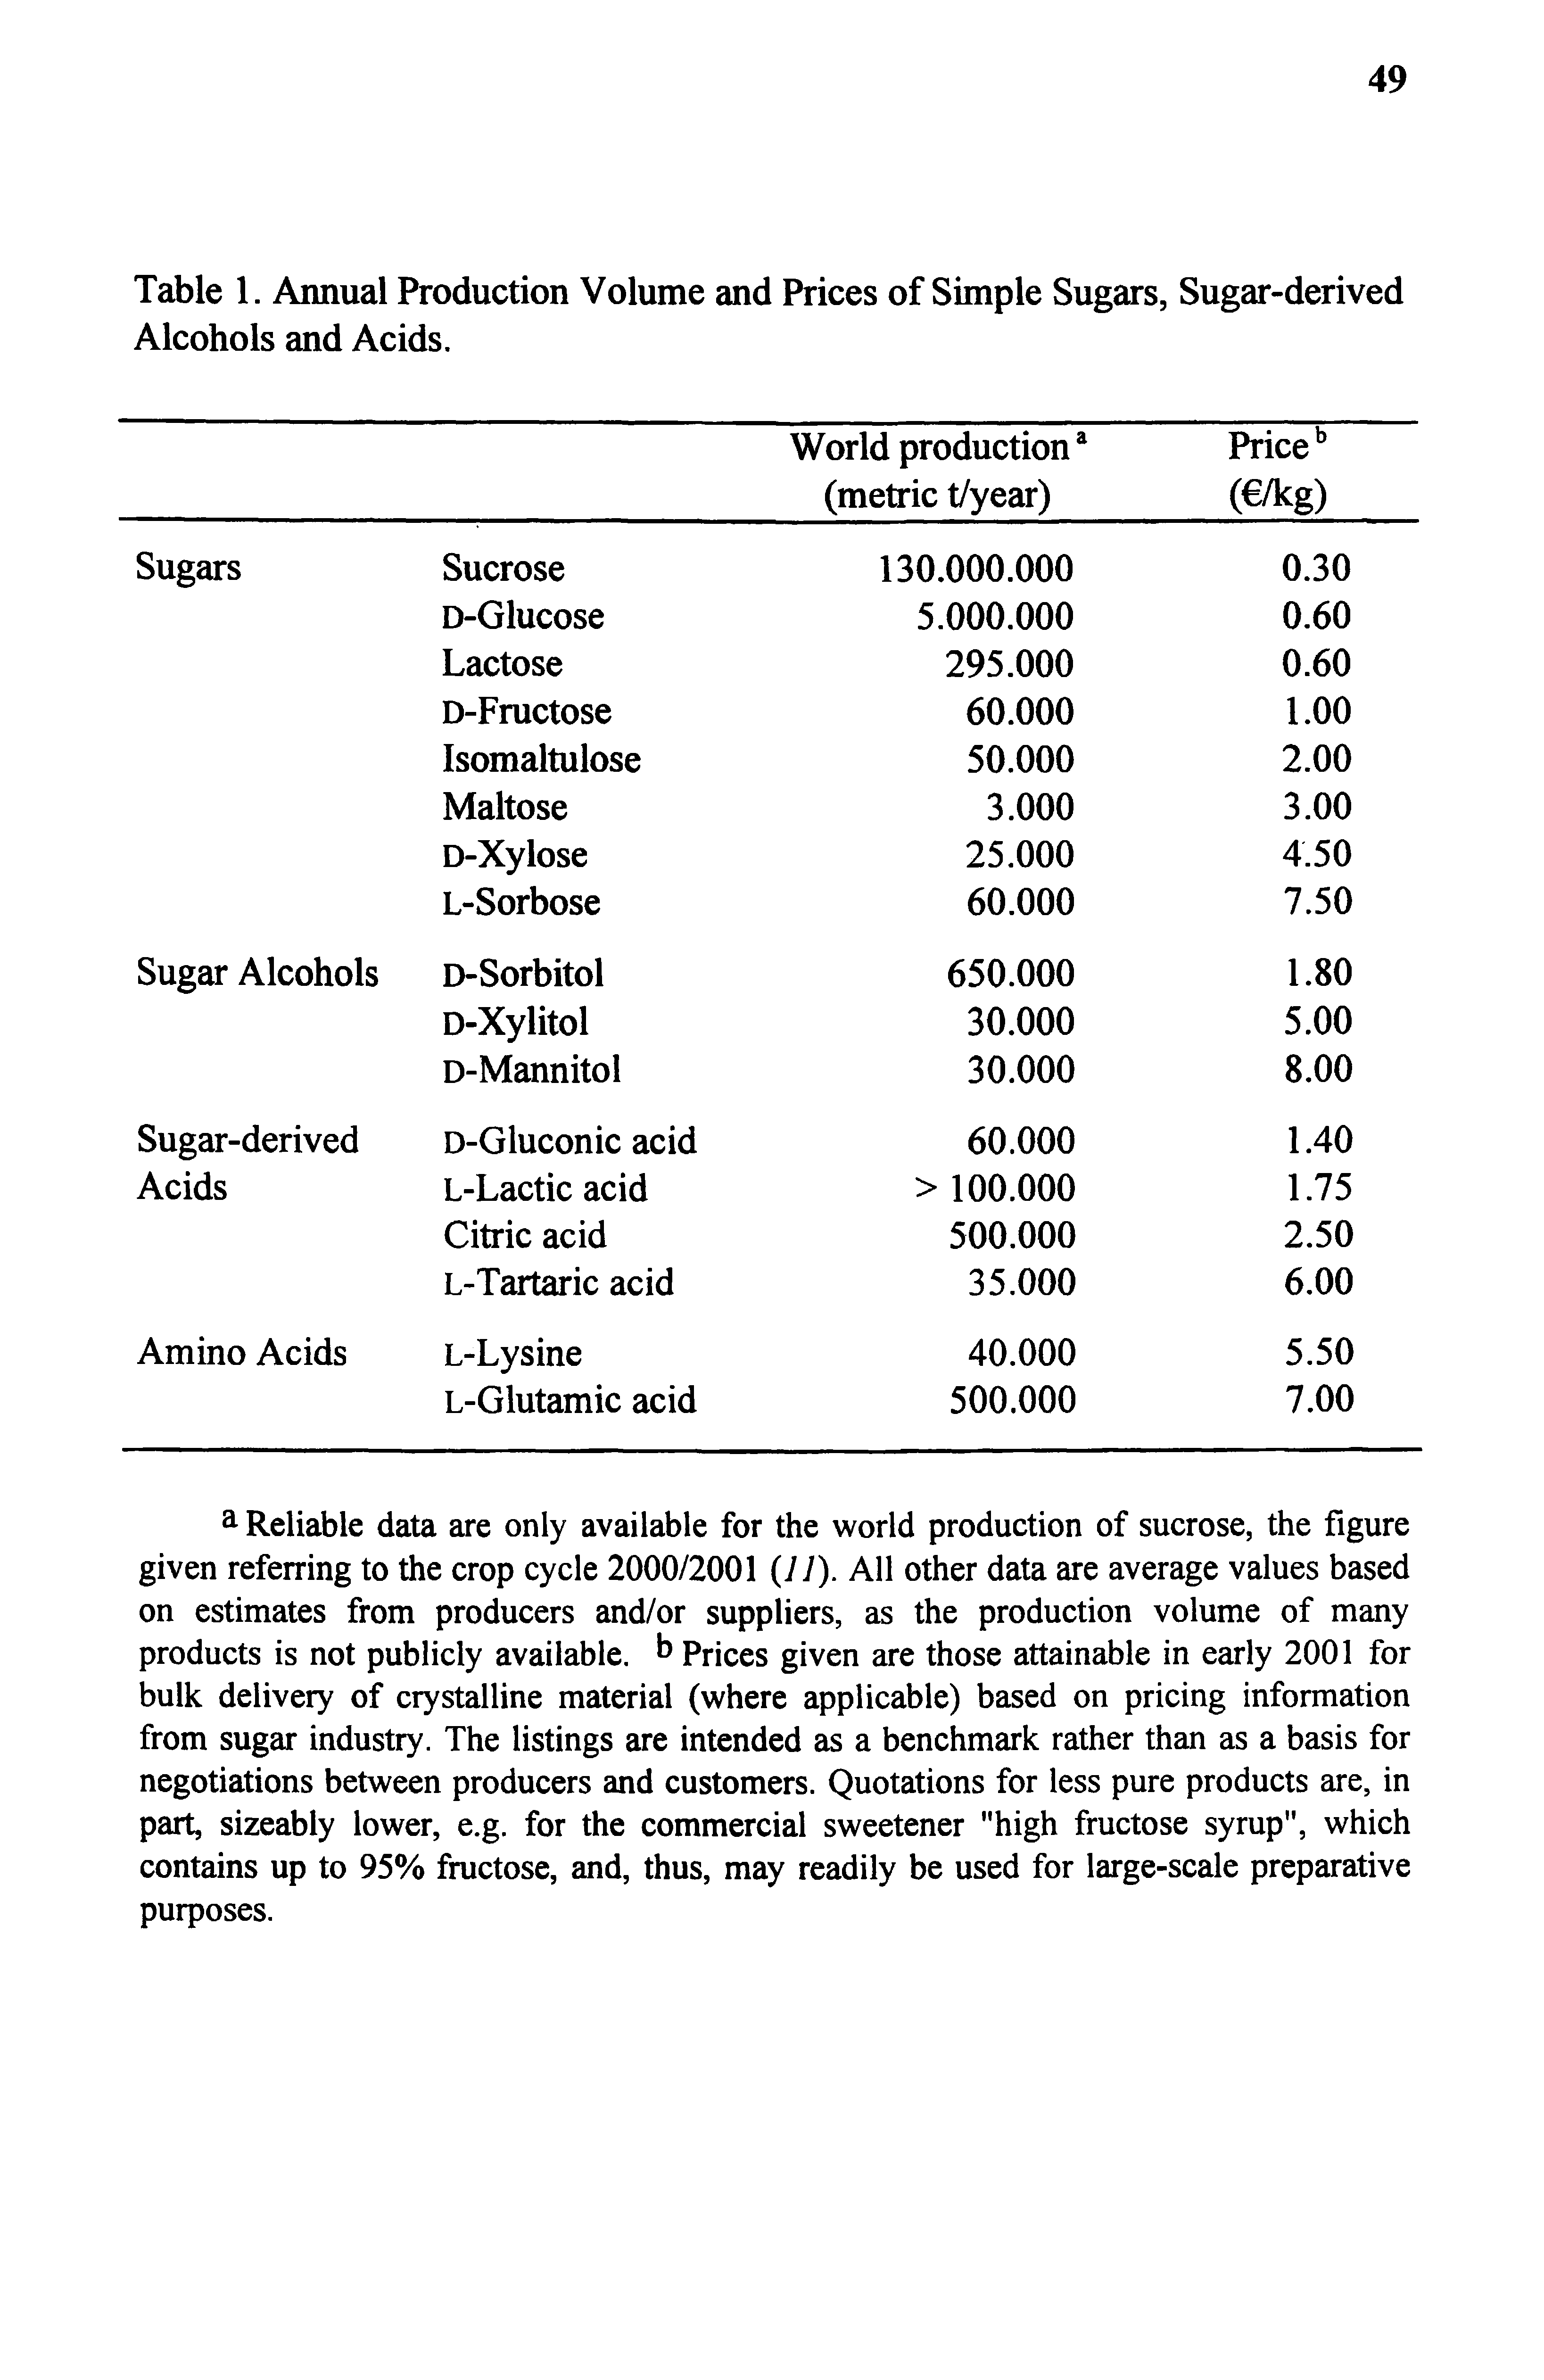 Table 1. Annual Production Volume and Prices of Simple Sugars, Sugar-derived Alcohols and Acids.